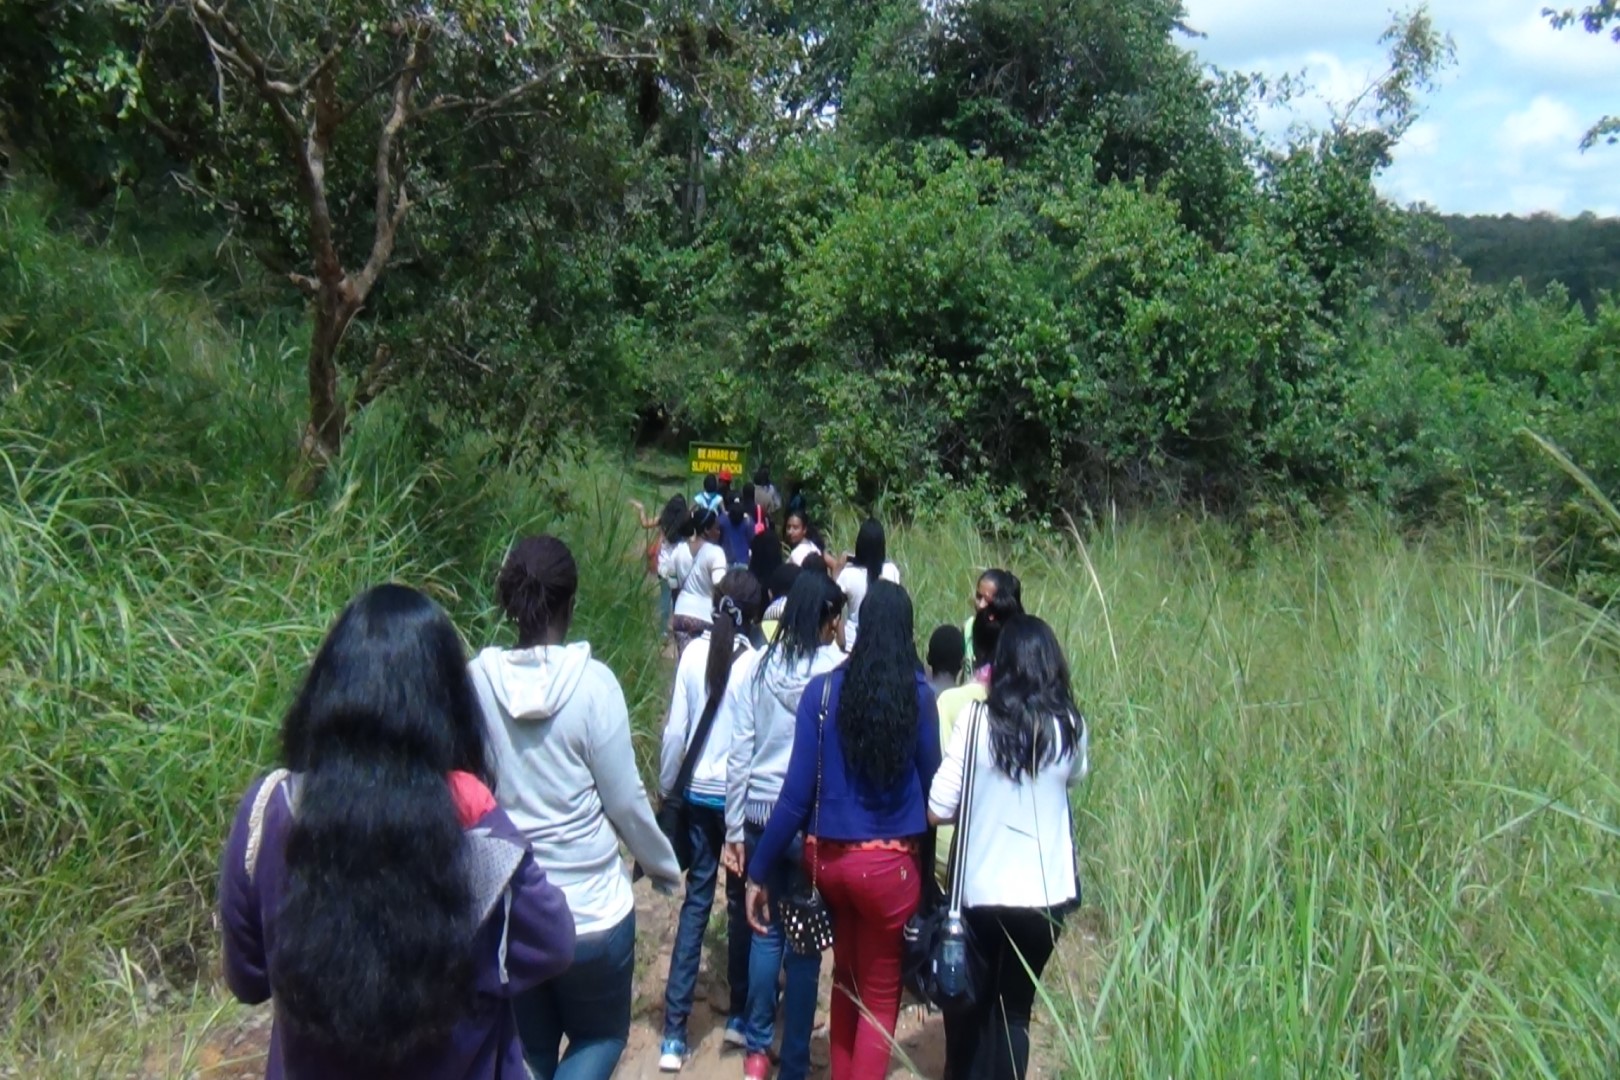 Students on a nature walking safari in Murchison Falls National Park